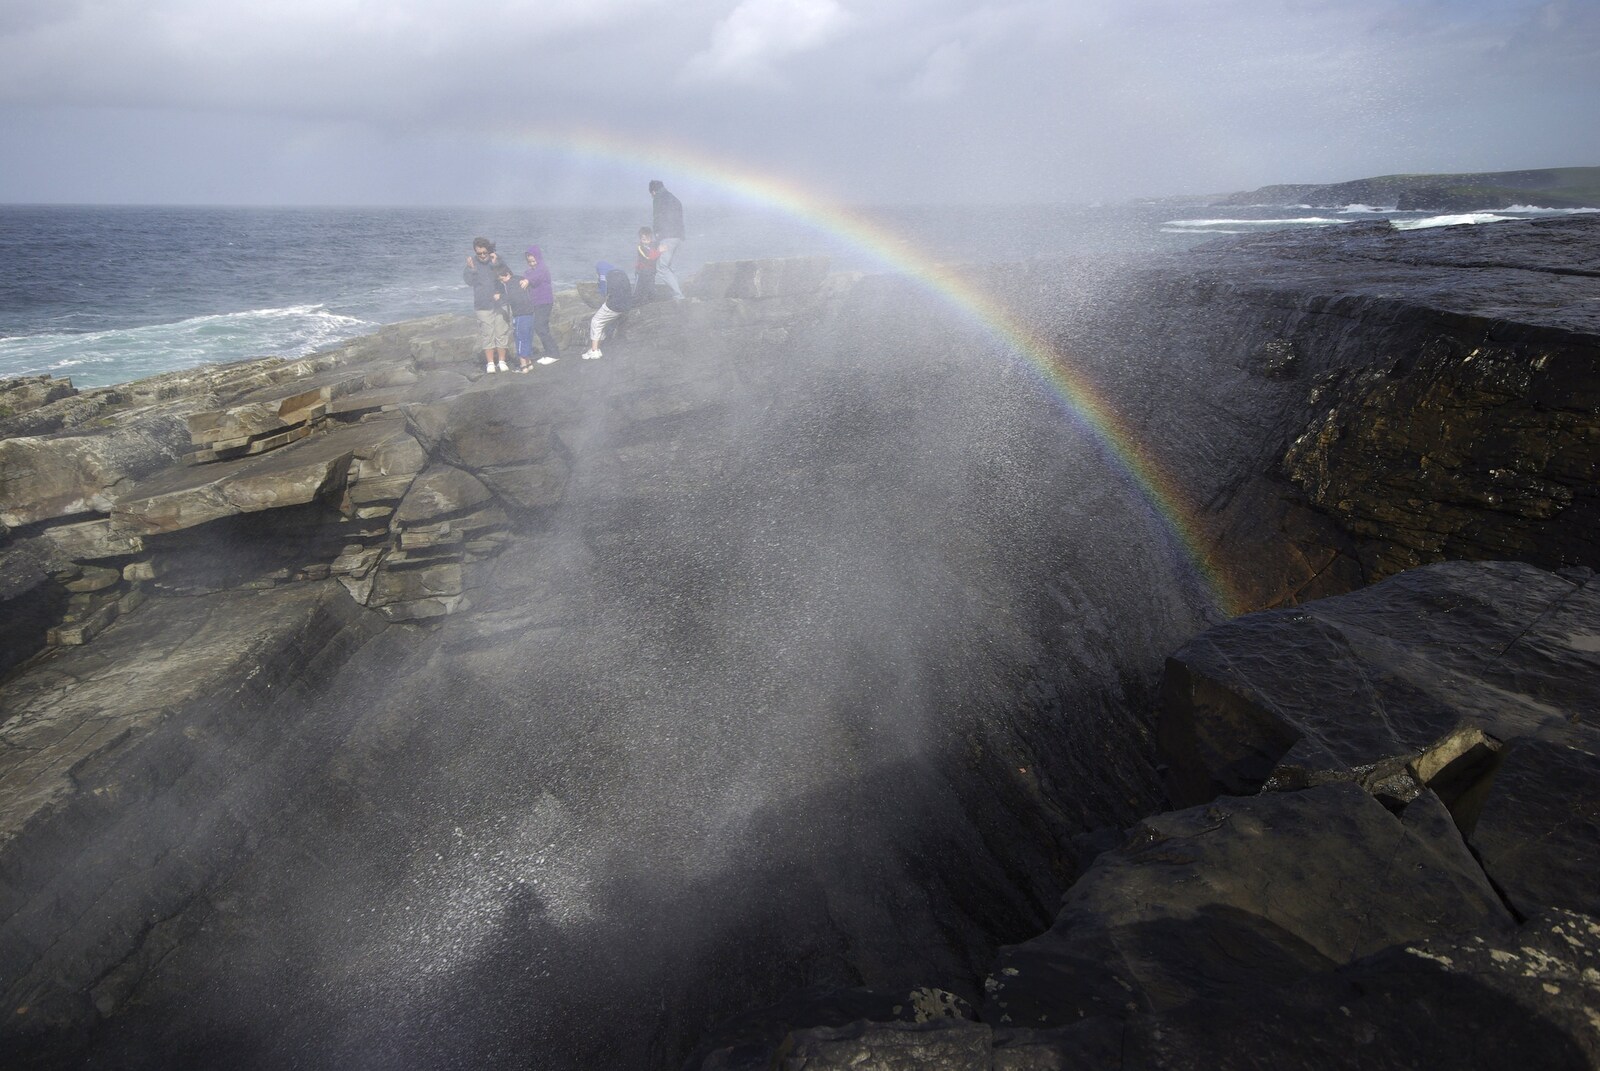 A rainbow is formed as spray blasts up though the 'Puffin' Hole' from 30th Birthday Party in Kilkee, County Clare, Ireland - 22nd September 2007